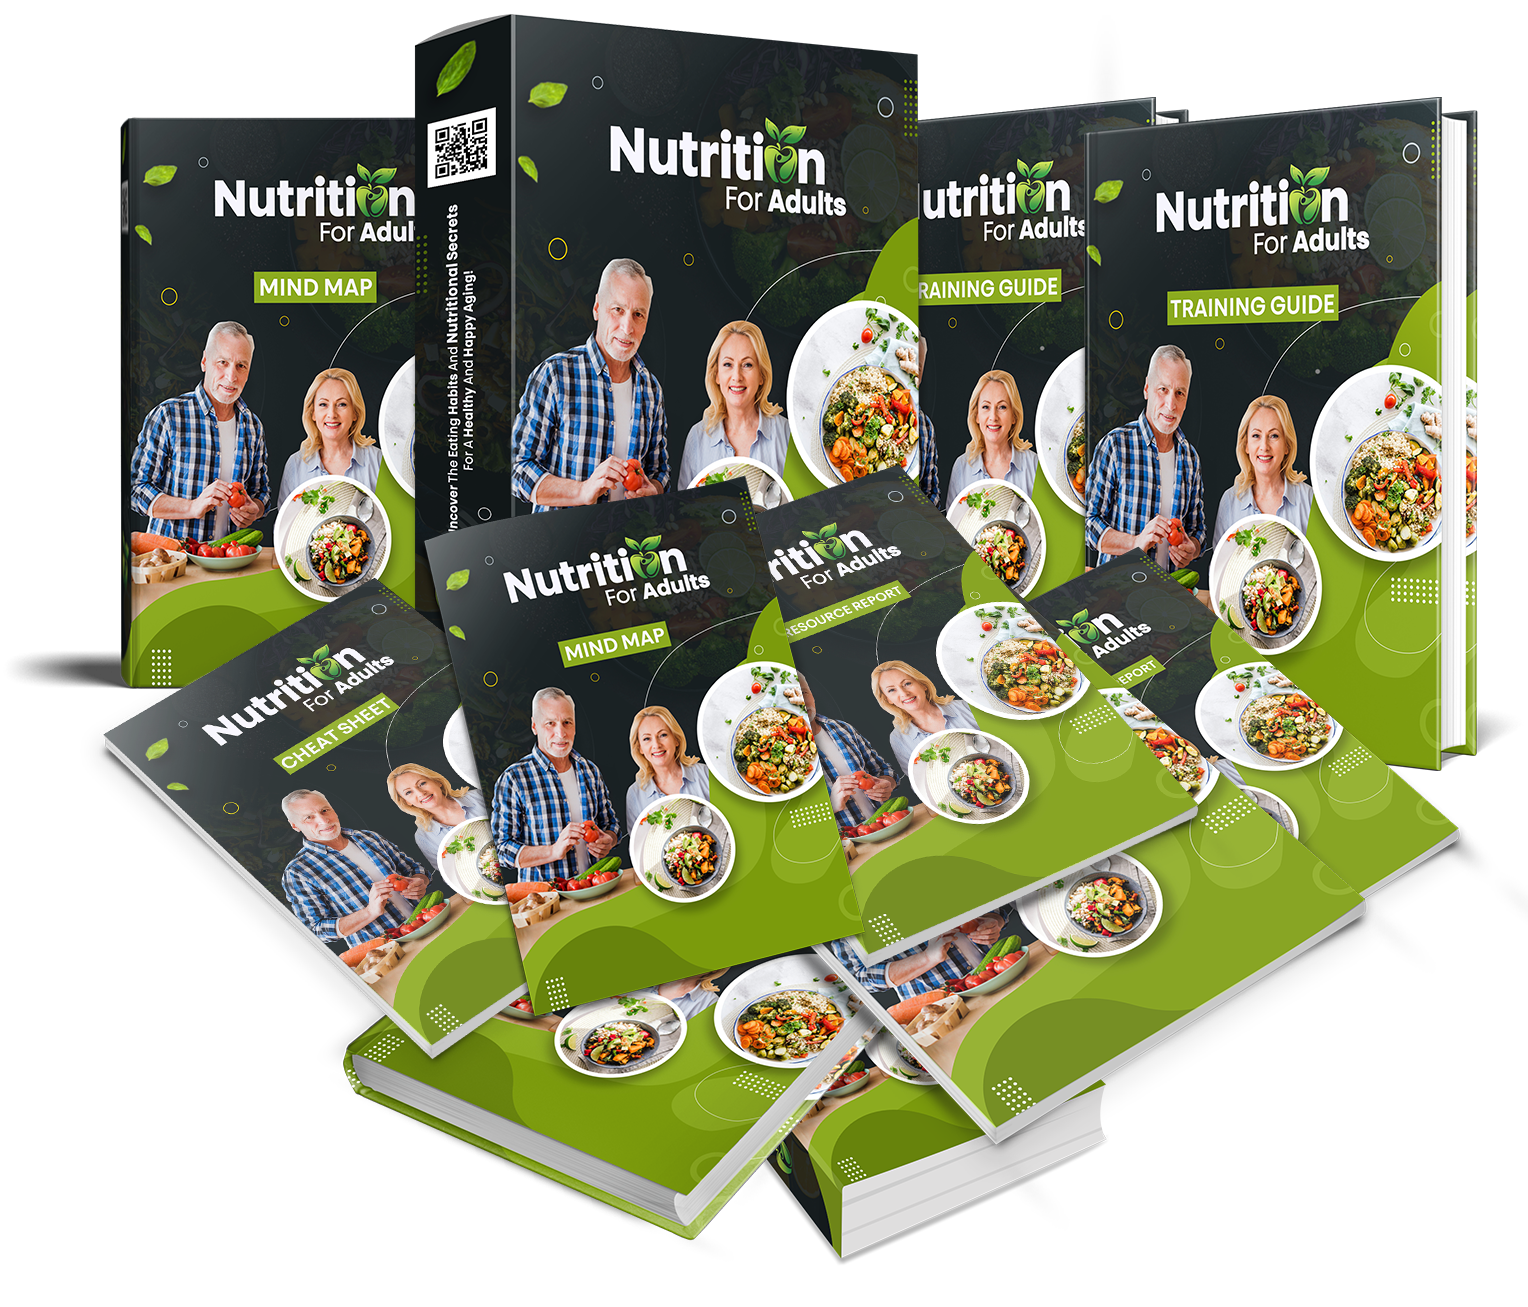 Nutrition For Adults PLR Review